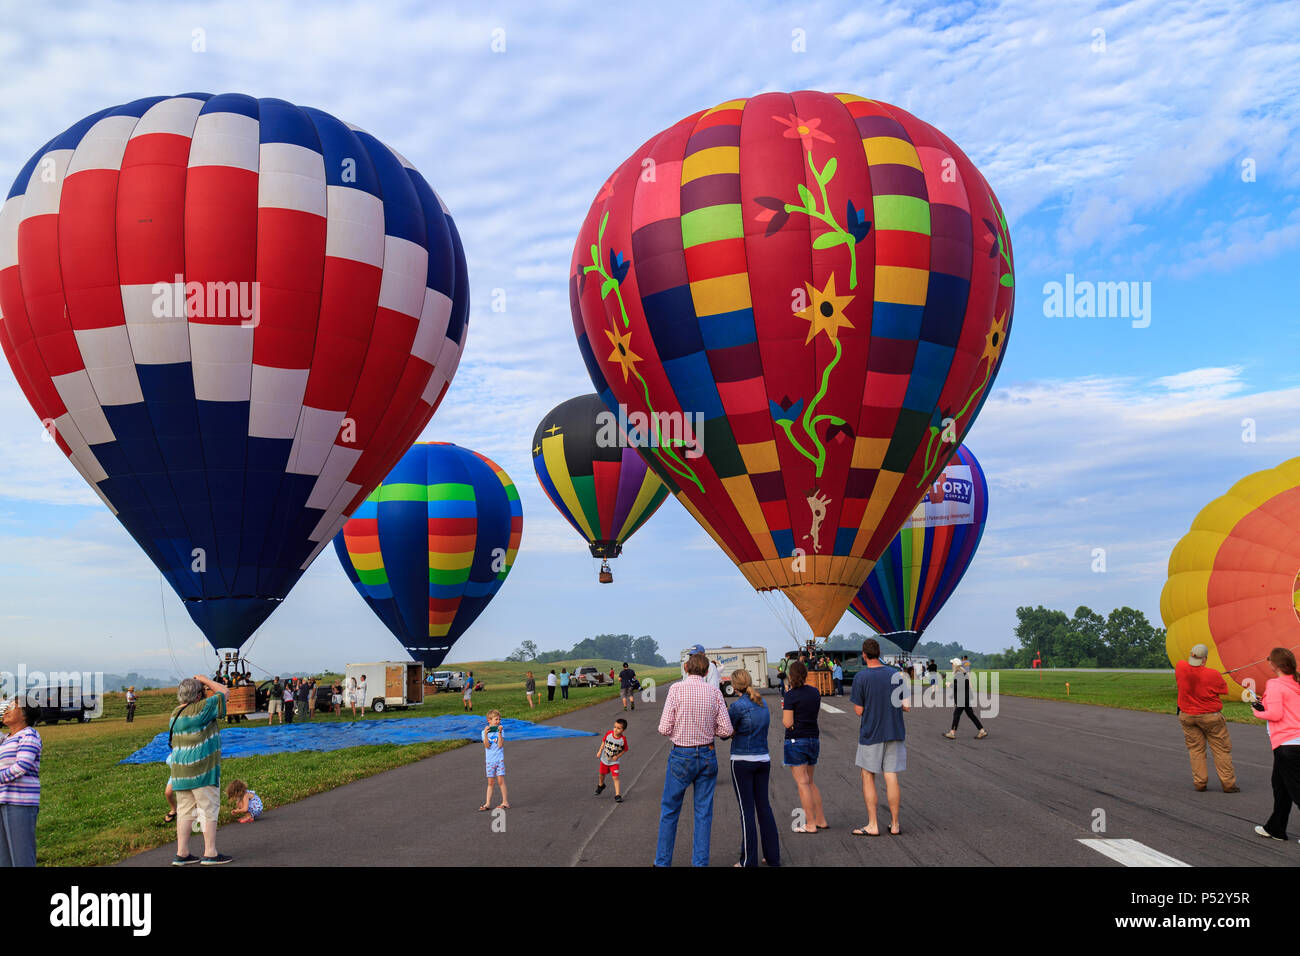 Avondale Pa Usa June 24 2018 Hot Air Balloons Ready For